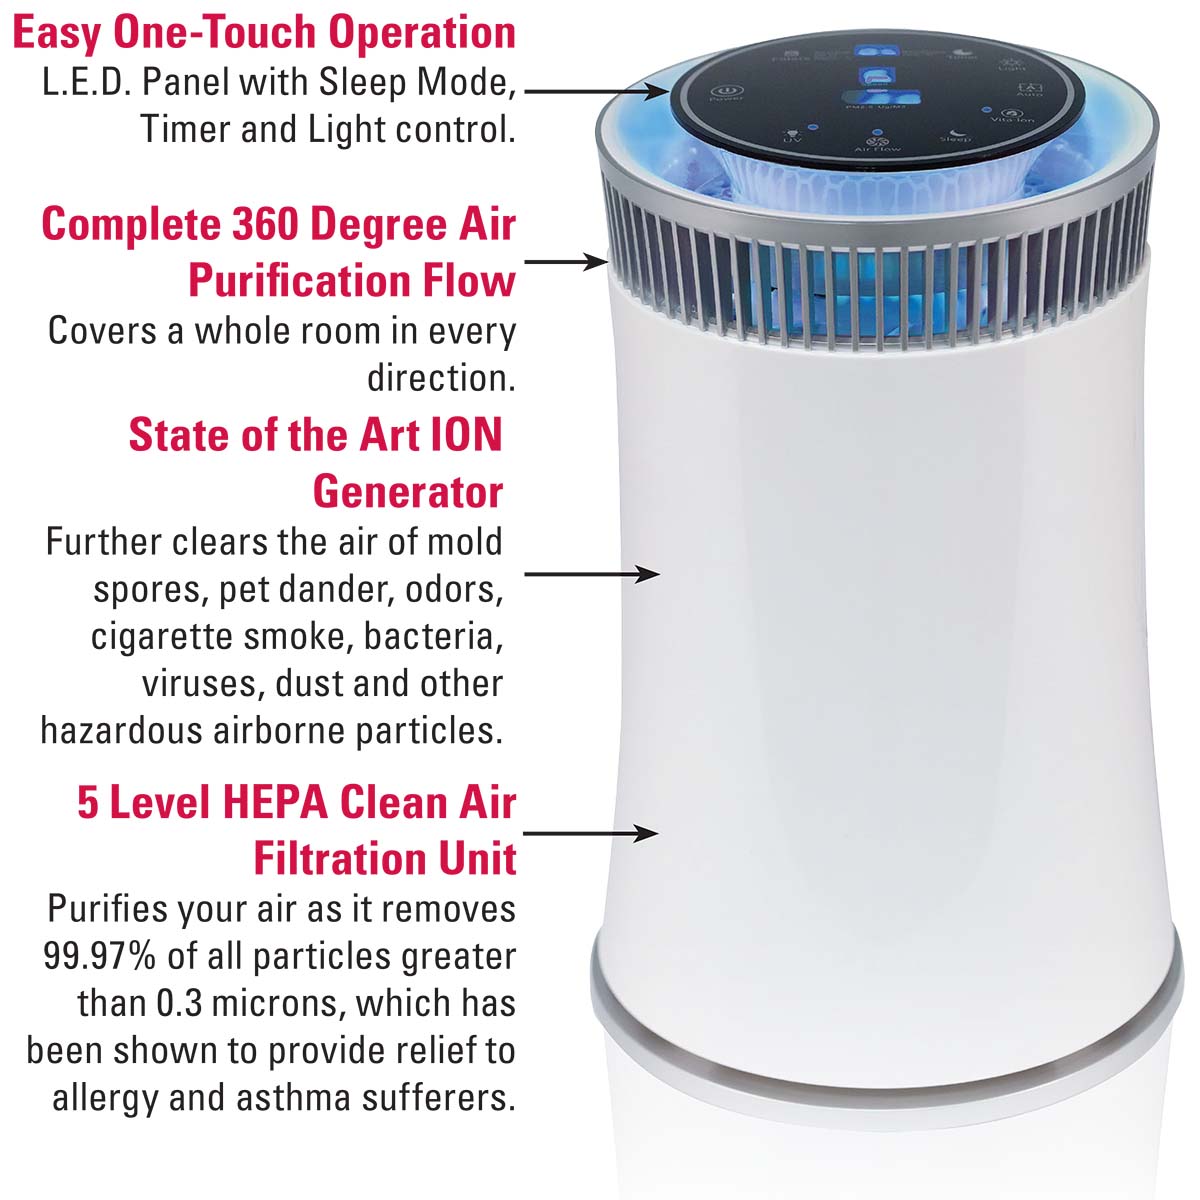 Easy One-Touch Operation, Complete 360 Degree Air Purification Flow, State of the Art ION Generator, 5 Level HEPA Clean Air Filtration Unit